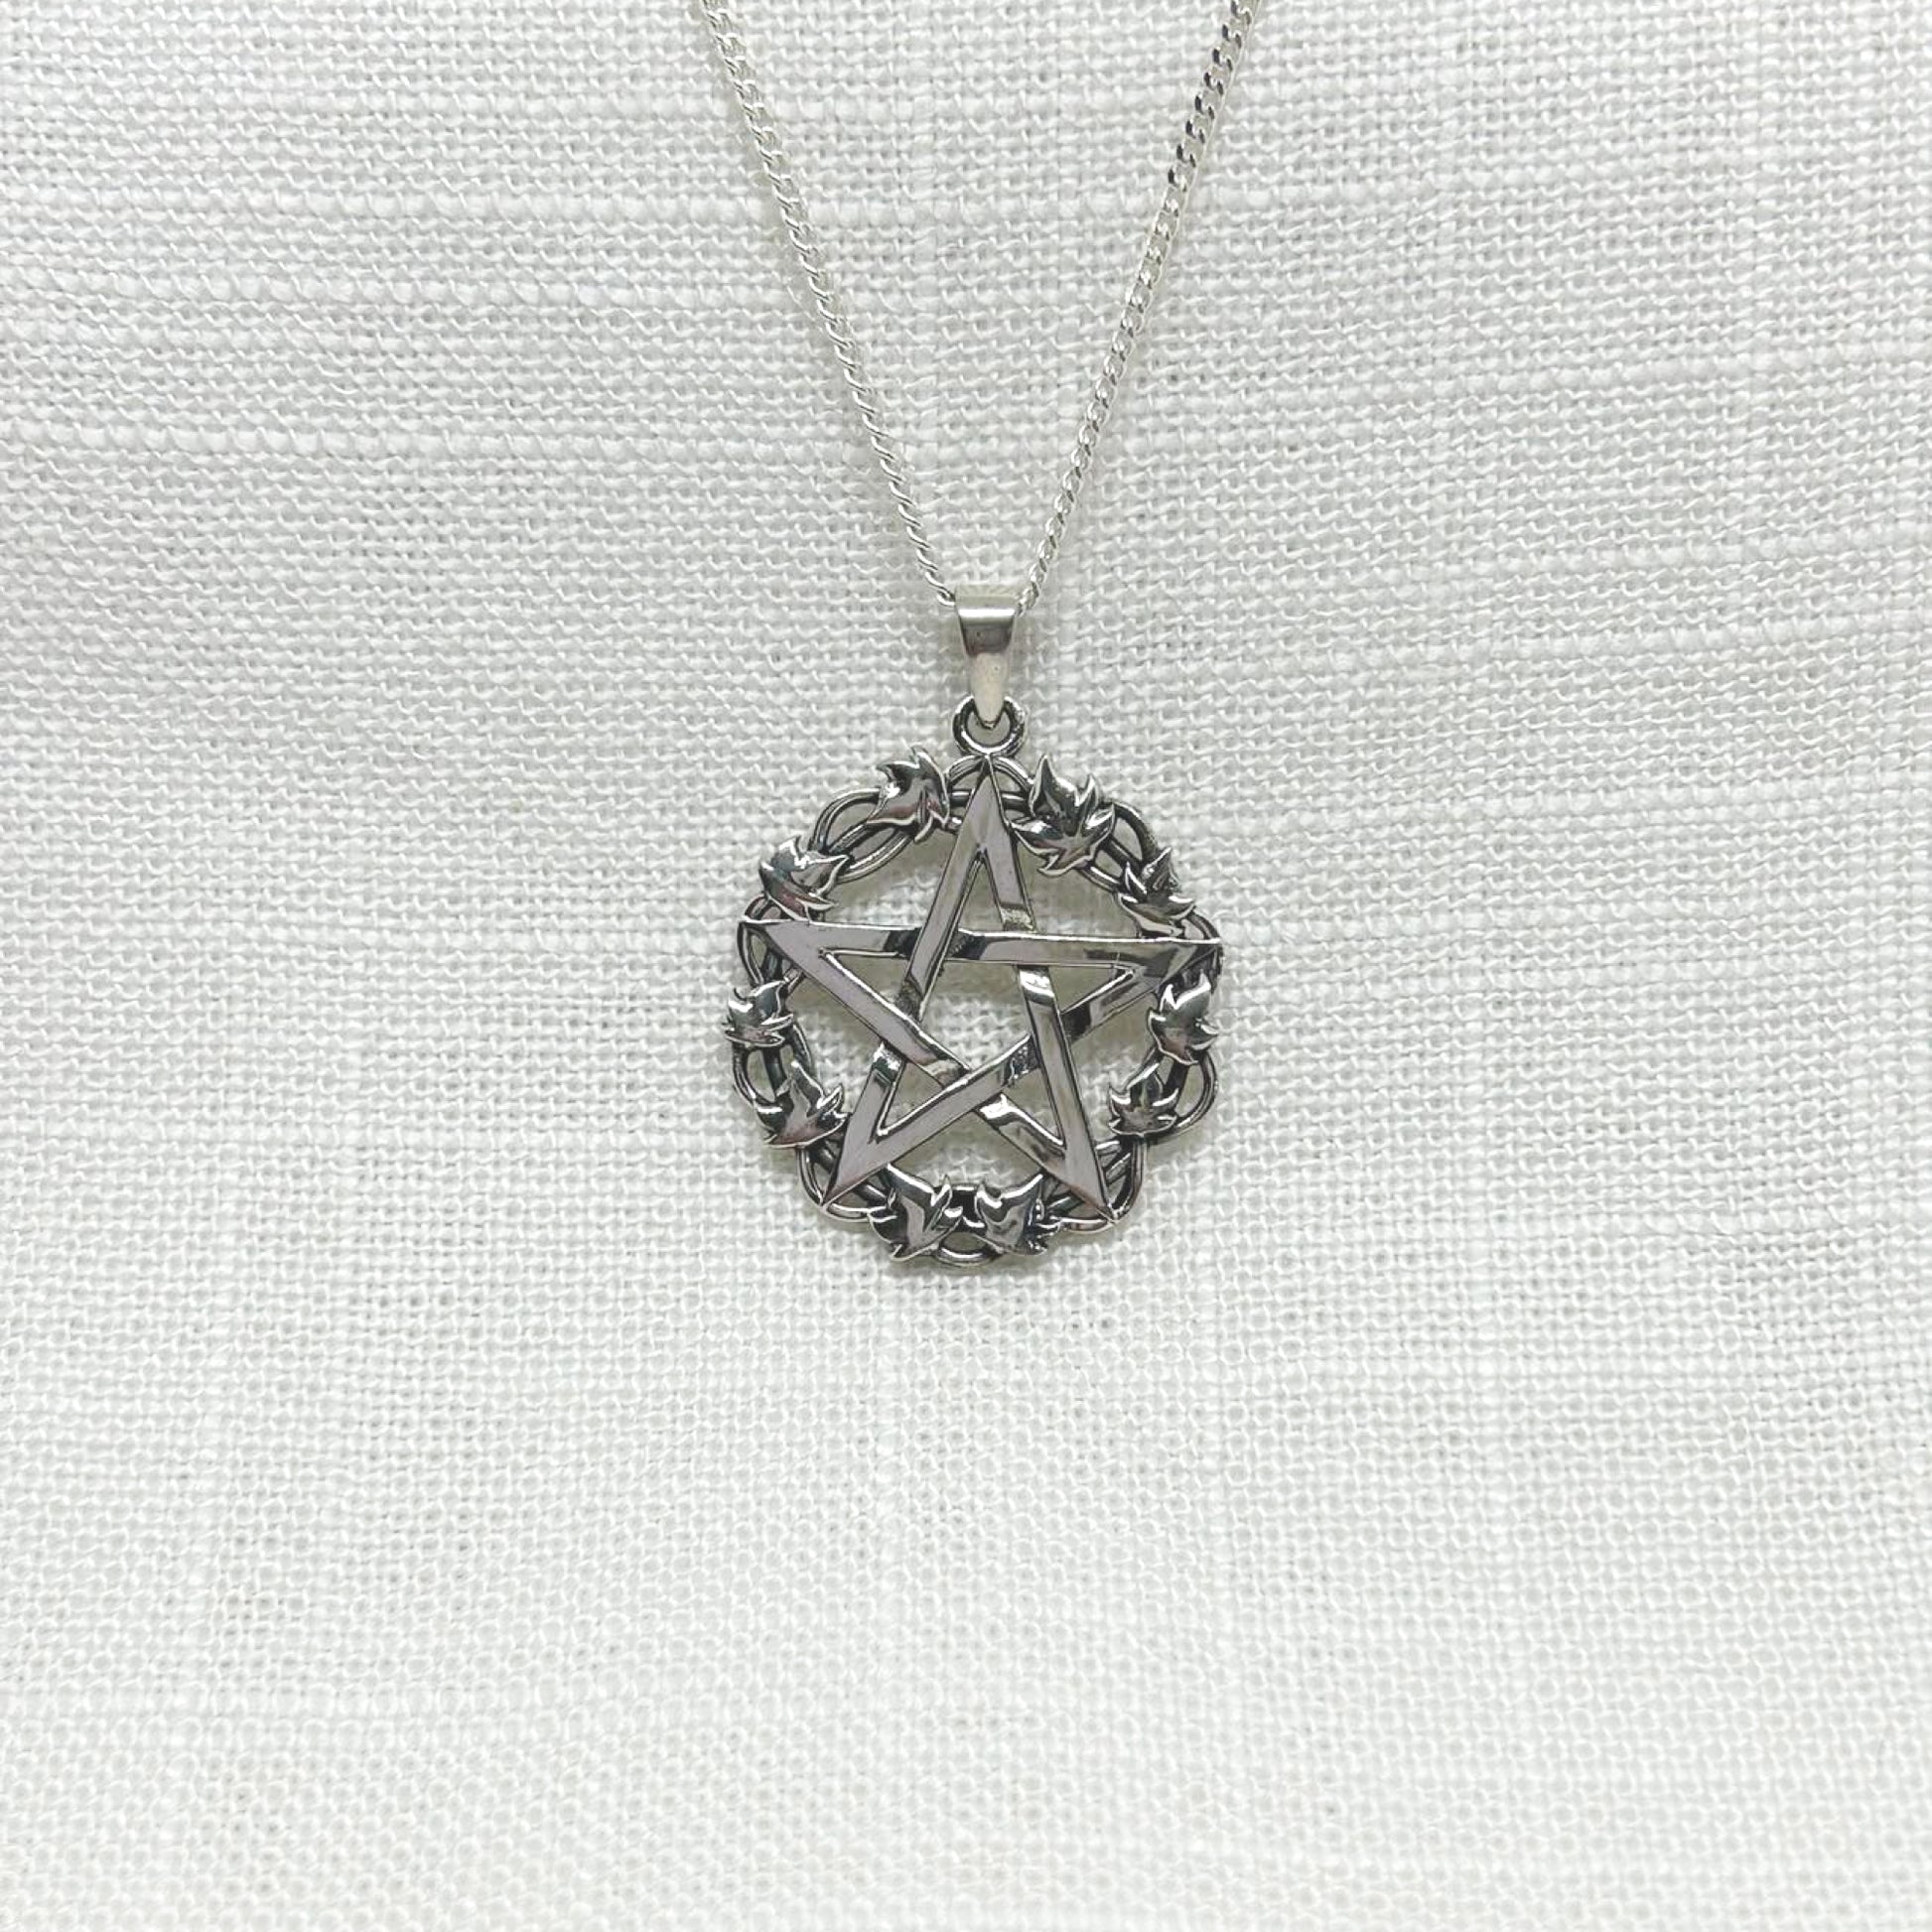 This beautiful solid .925 silver pentagram necklace is encircled by ivy leaves. Ivy is the symbolism of fidelity. Because ivy grows in the shape of a spiral, it is also considered to be associated with the Goddess and guards against negativity. All pendants come supplied on an 20" Sterling Silver Curb Chain and are gift boxed. Size approx: W: 2.9cm x H: 3.2cm including bale